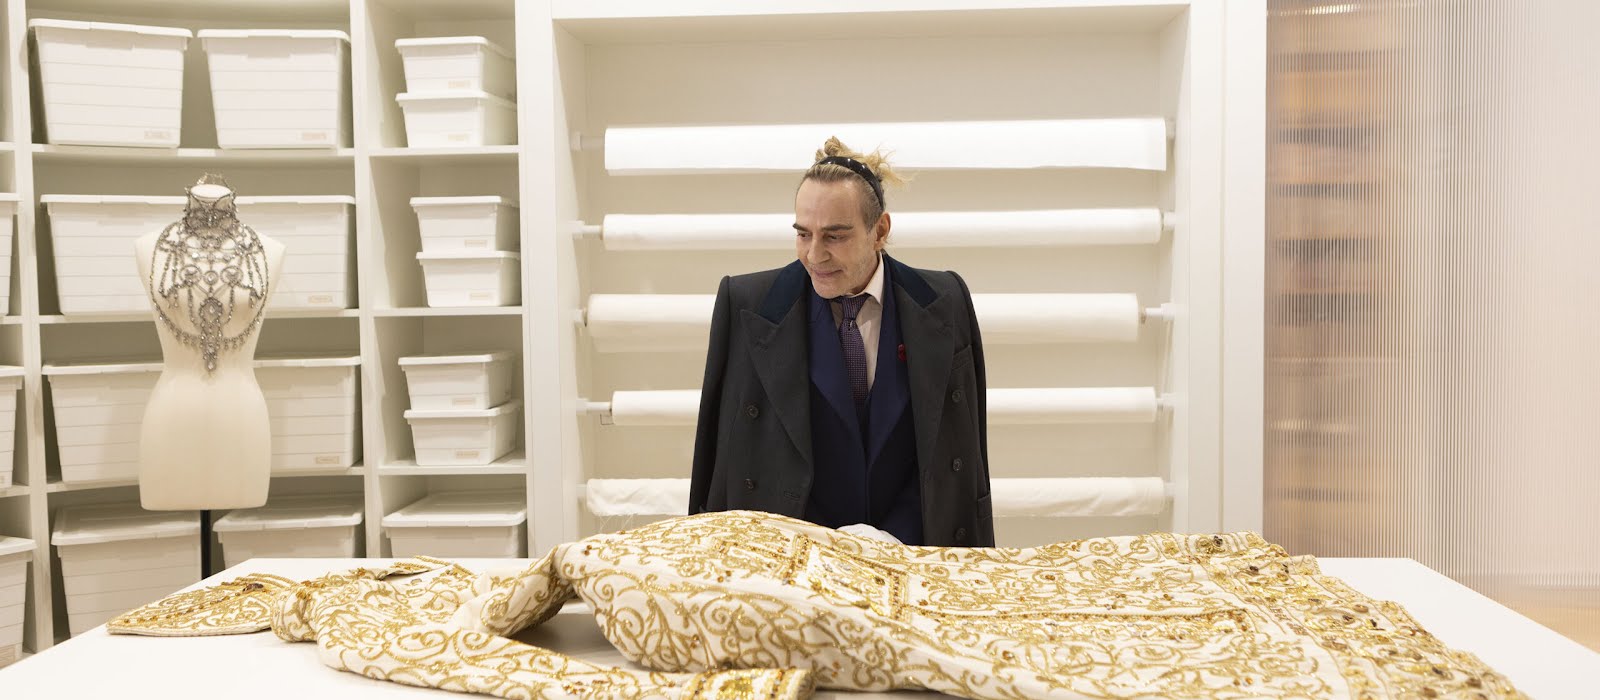 Fashion, cancel culture, antisemitism – the new John Galliano documentary explores it all